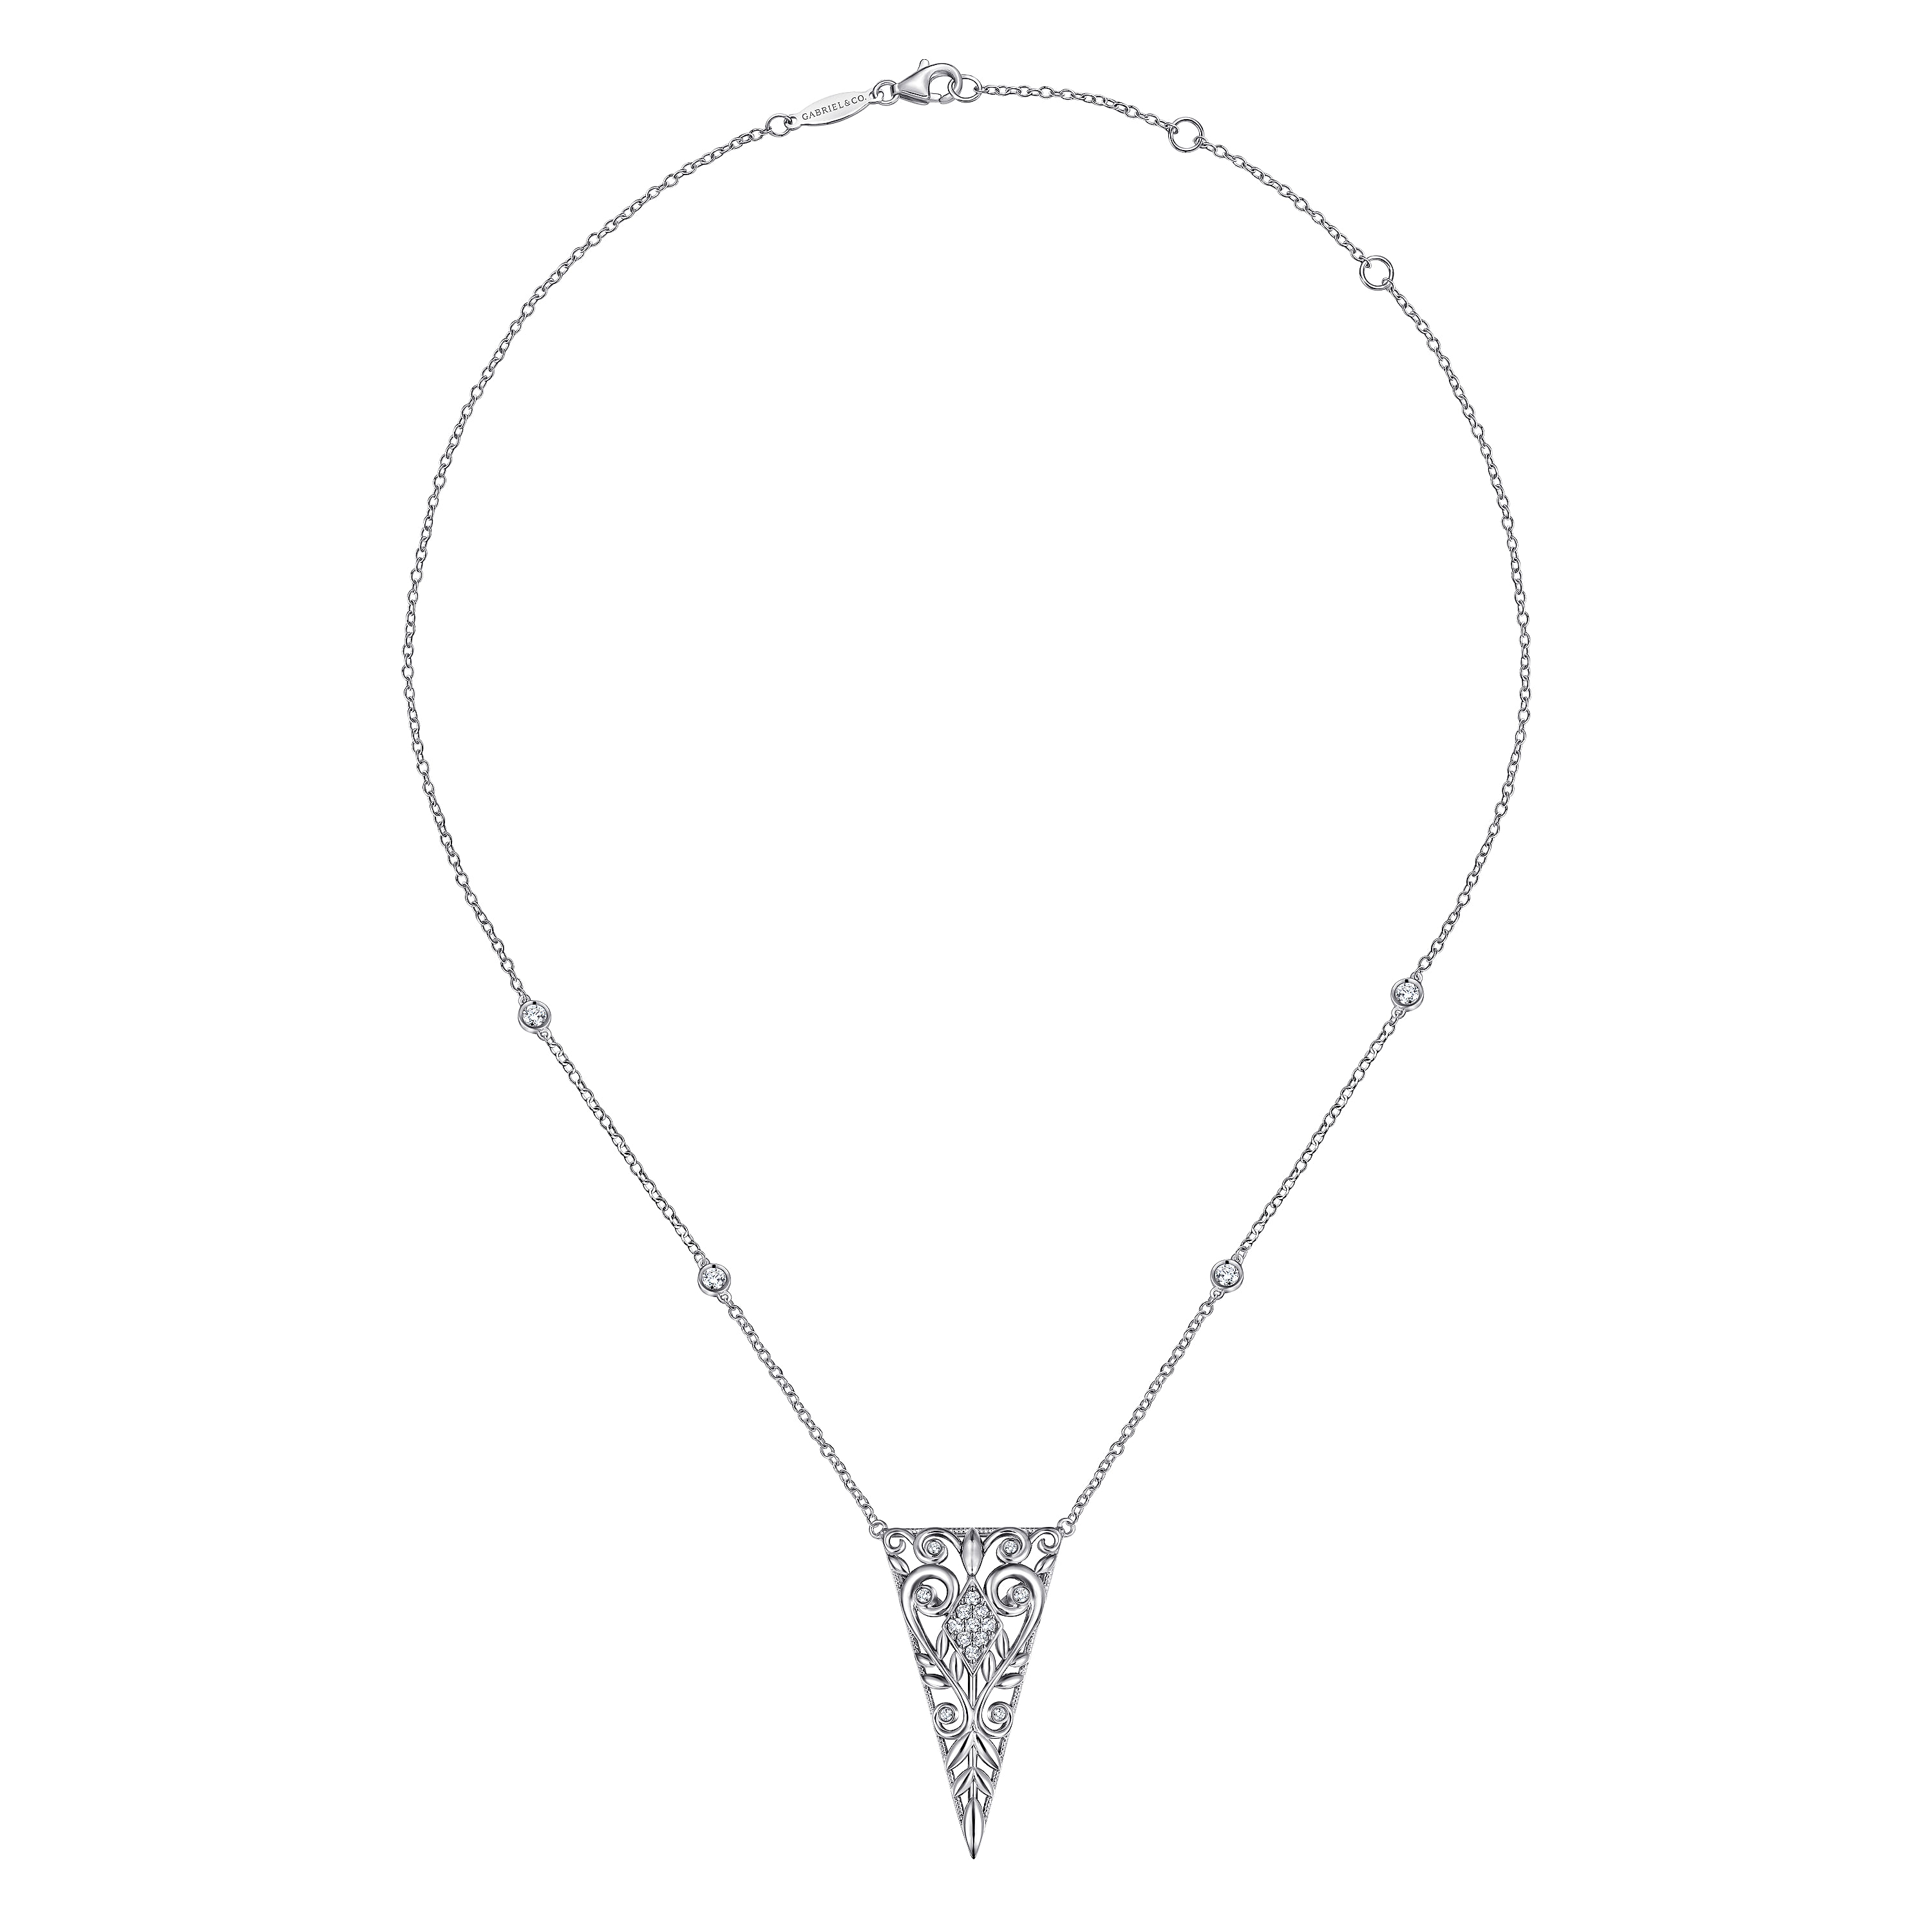 Vintage Inspired 925 Sterling Silver Triangular White Sapphire Pendant Necklace with Scrollwork